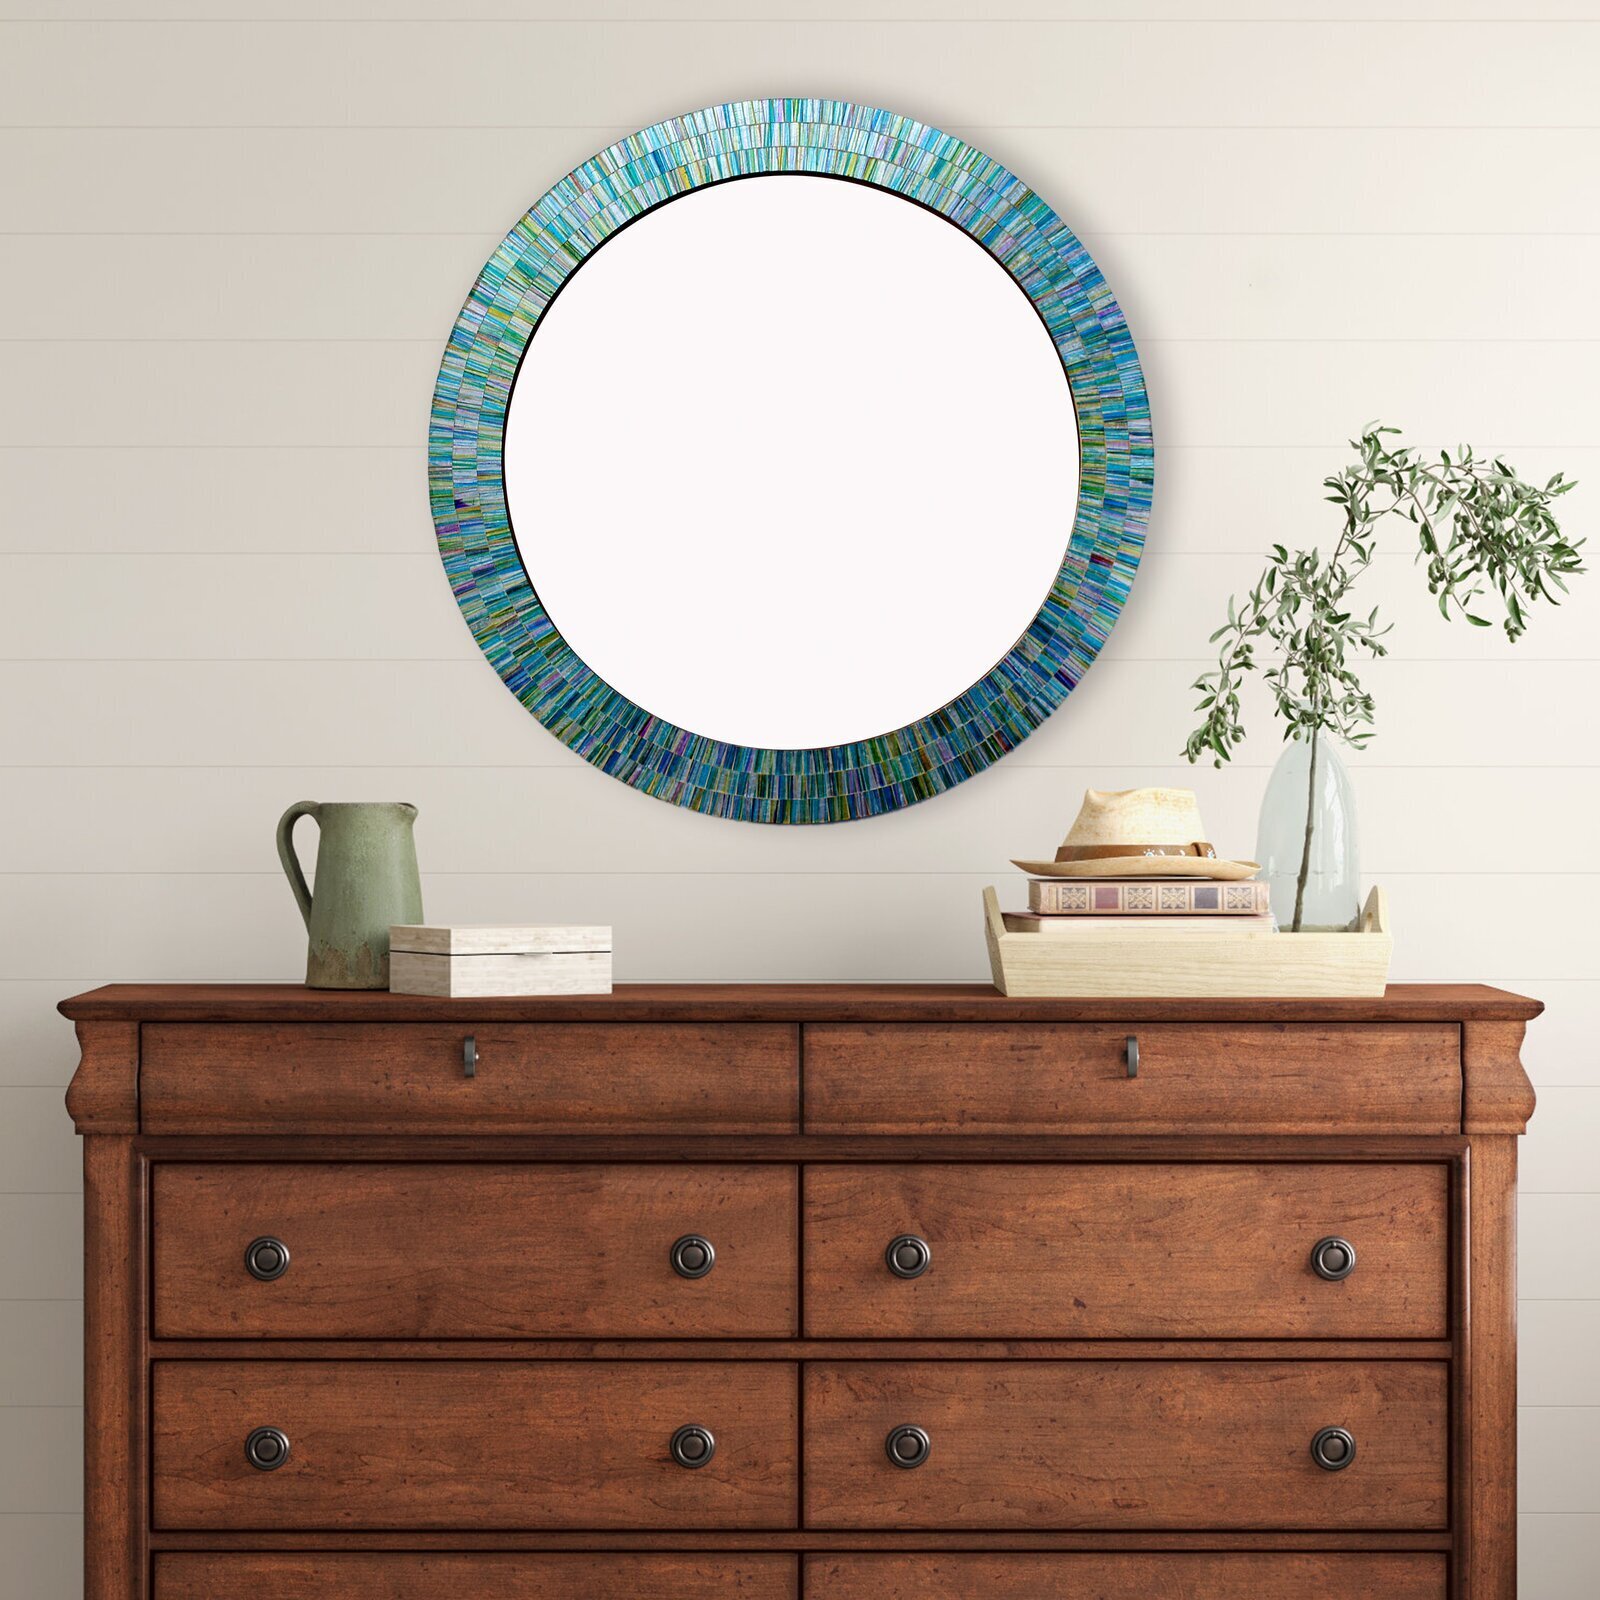 Colorful round mirror frame